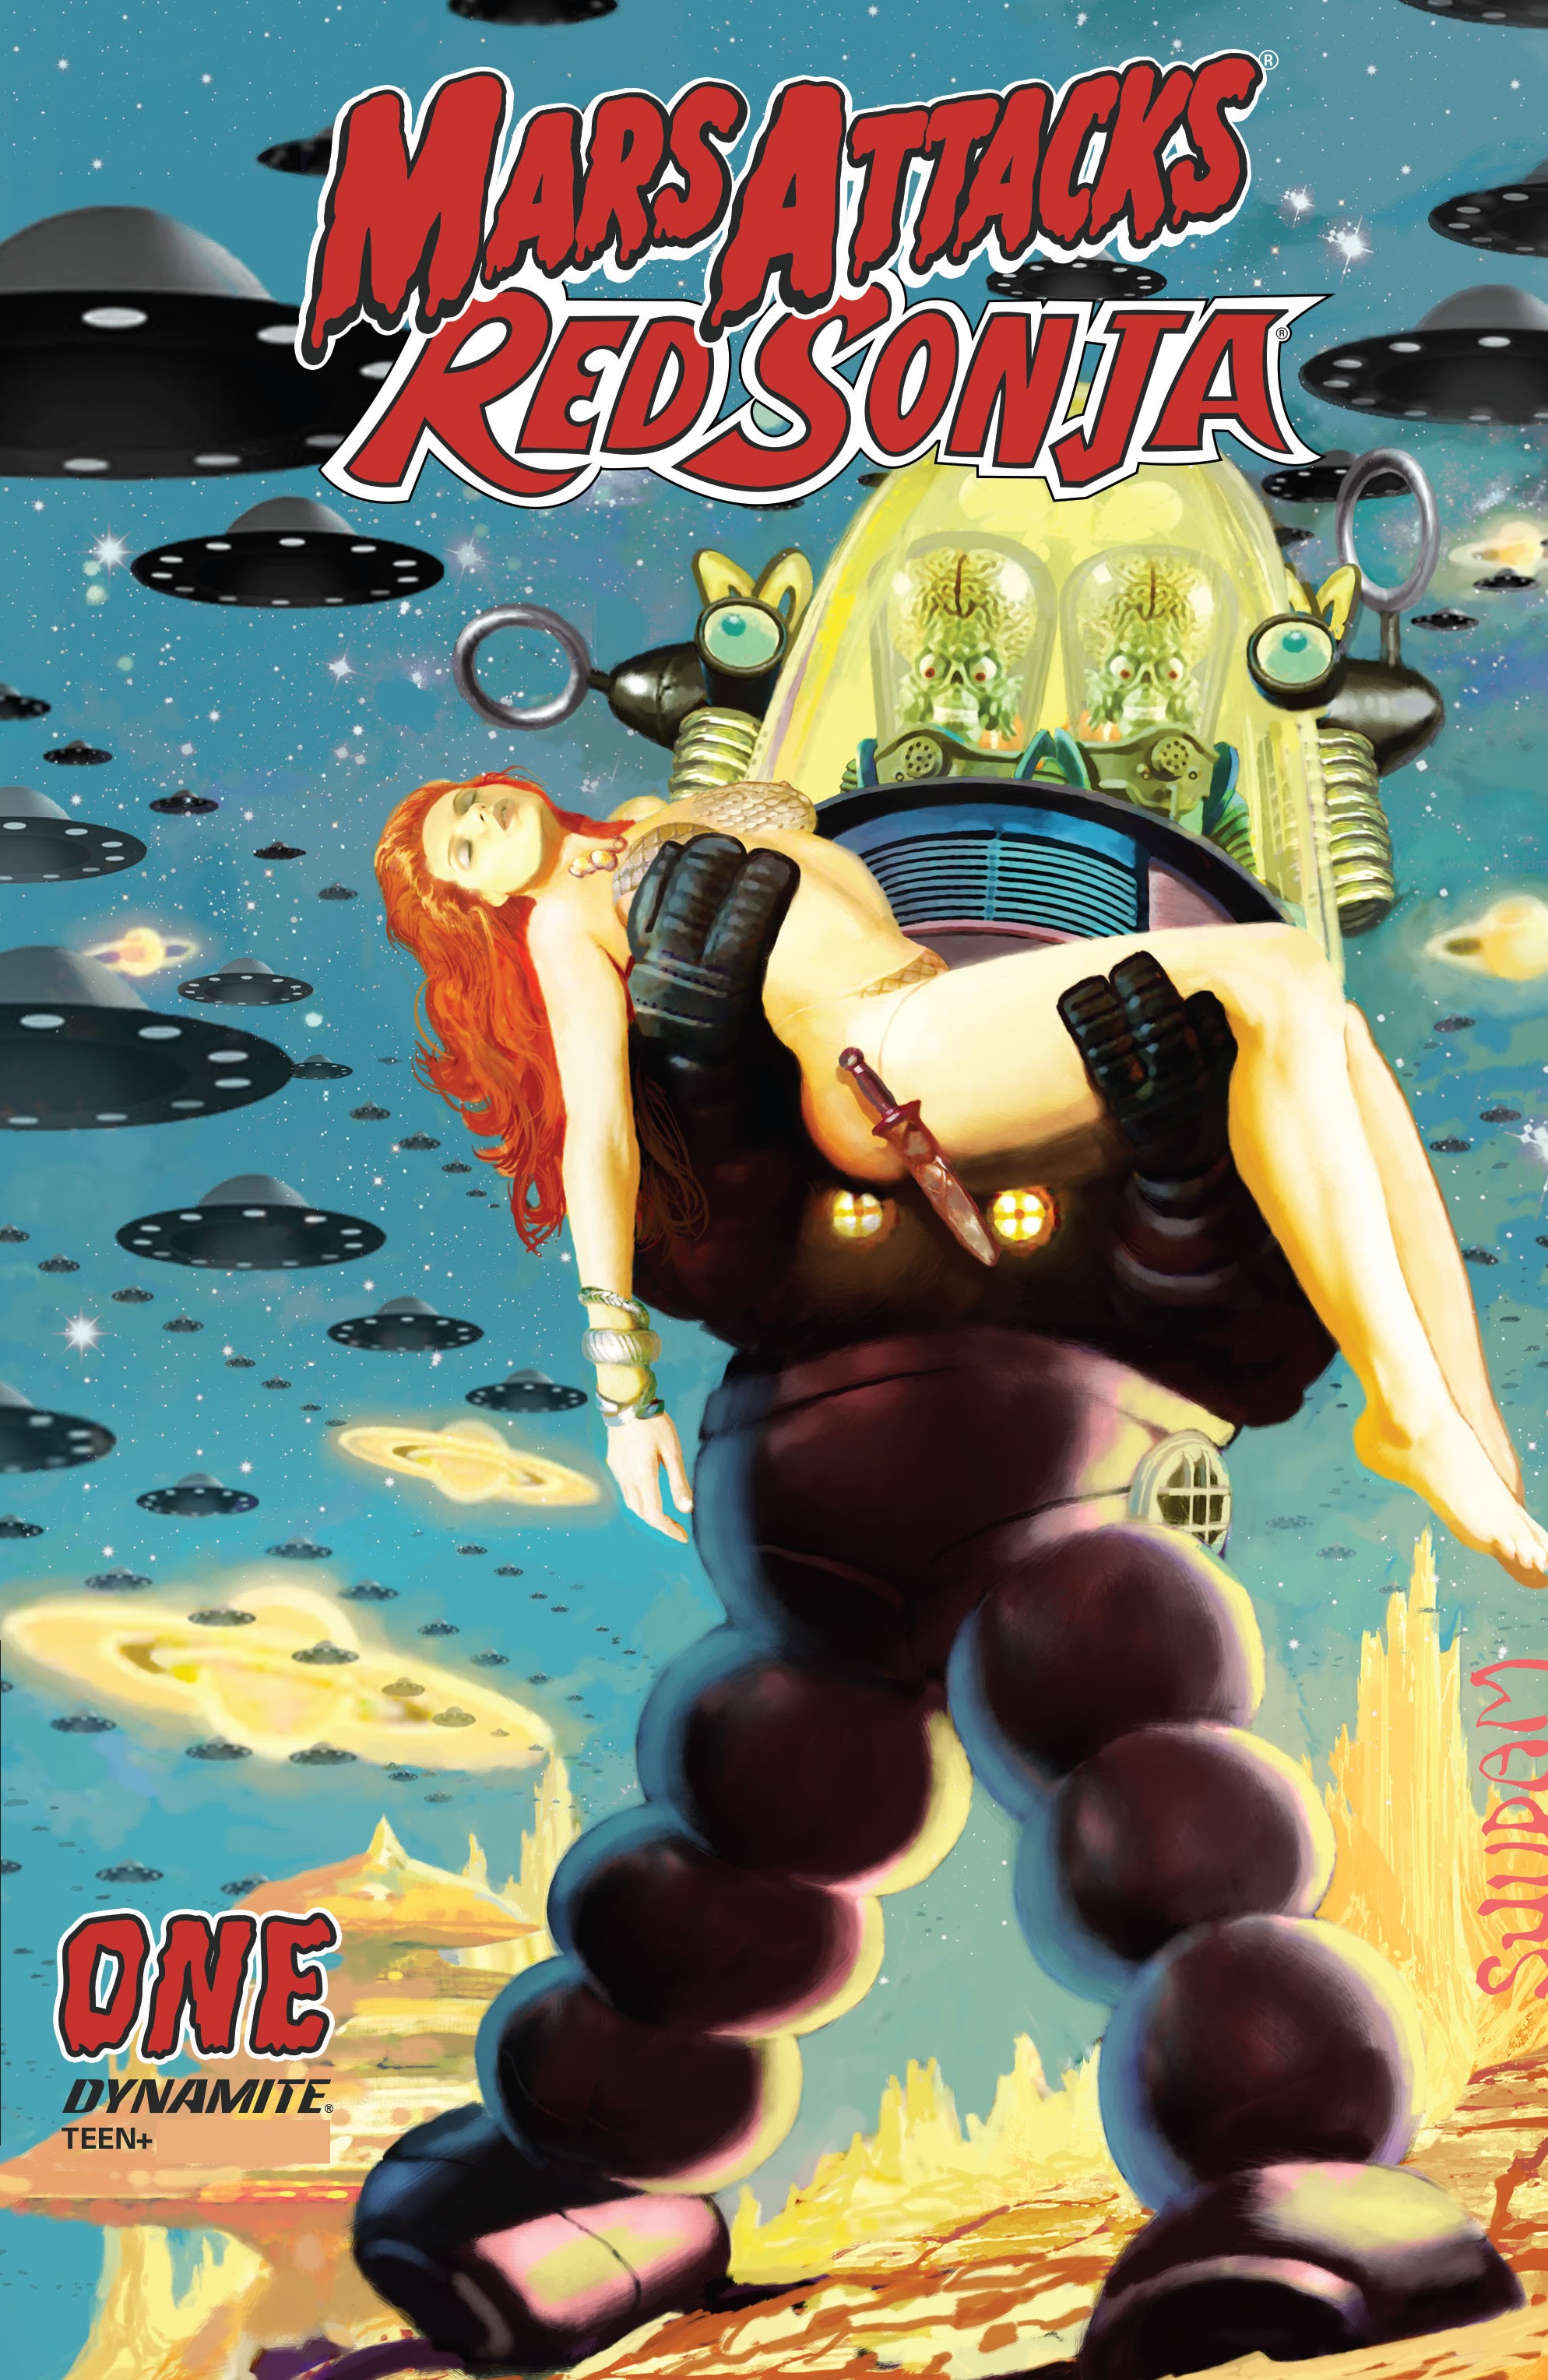 Read online Mars Attacks Red Sonja comic -  Issue #1 - 3